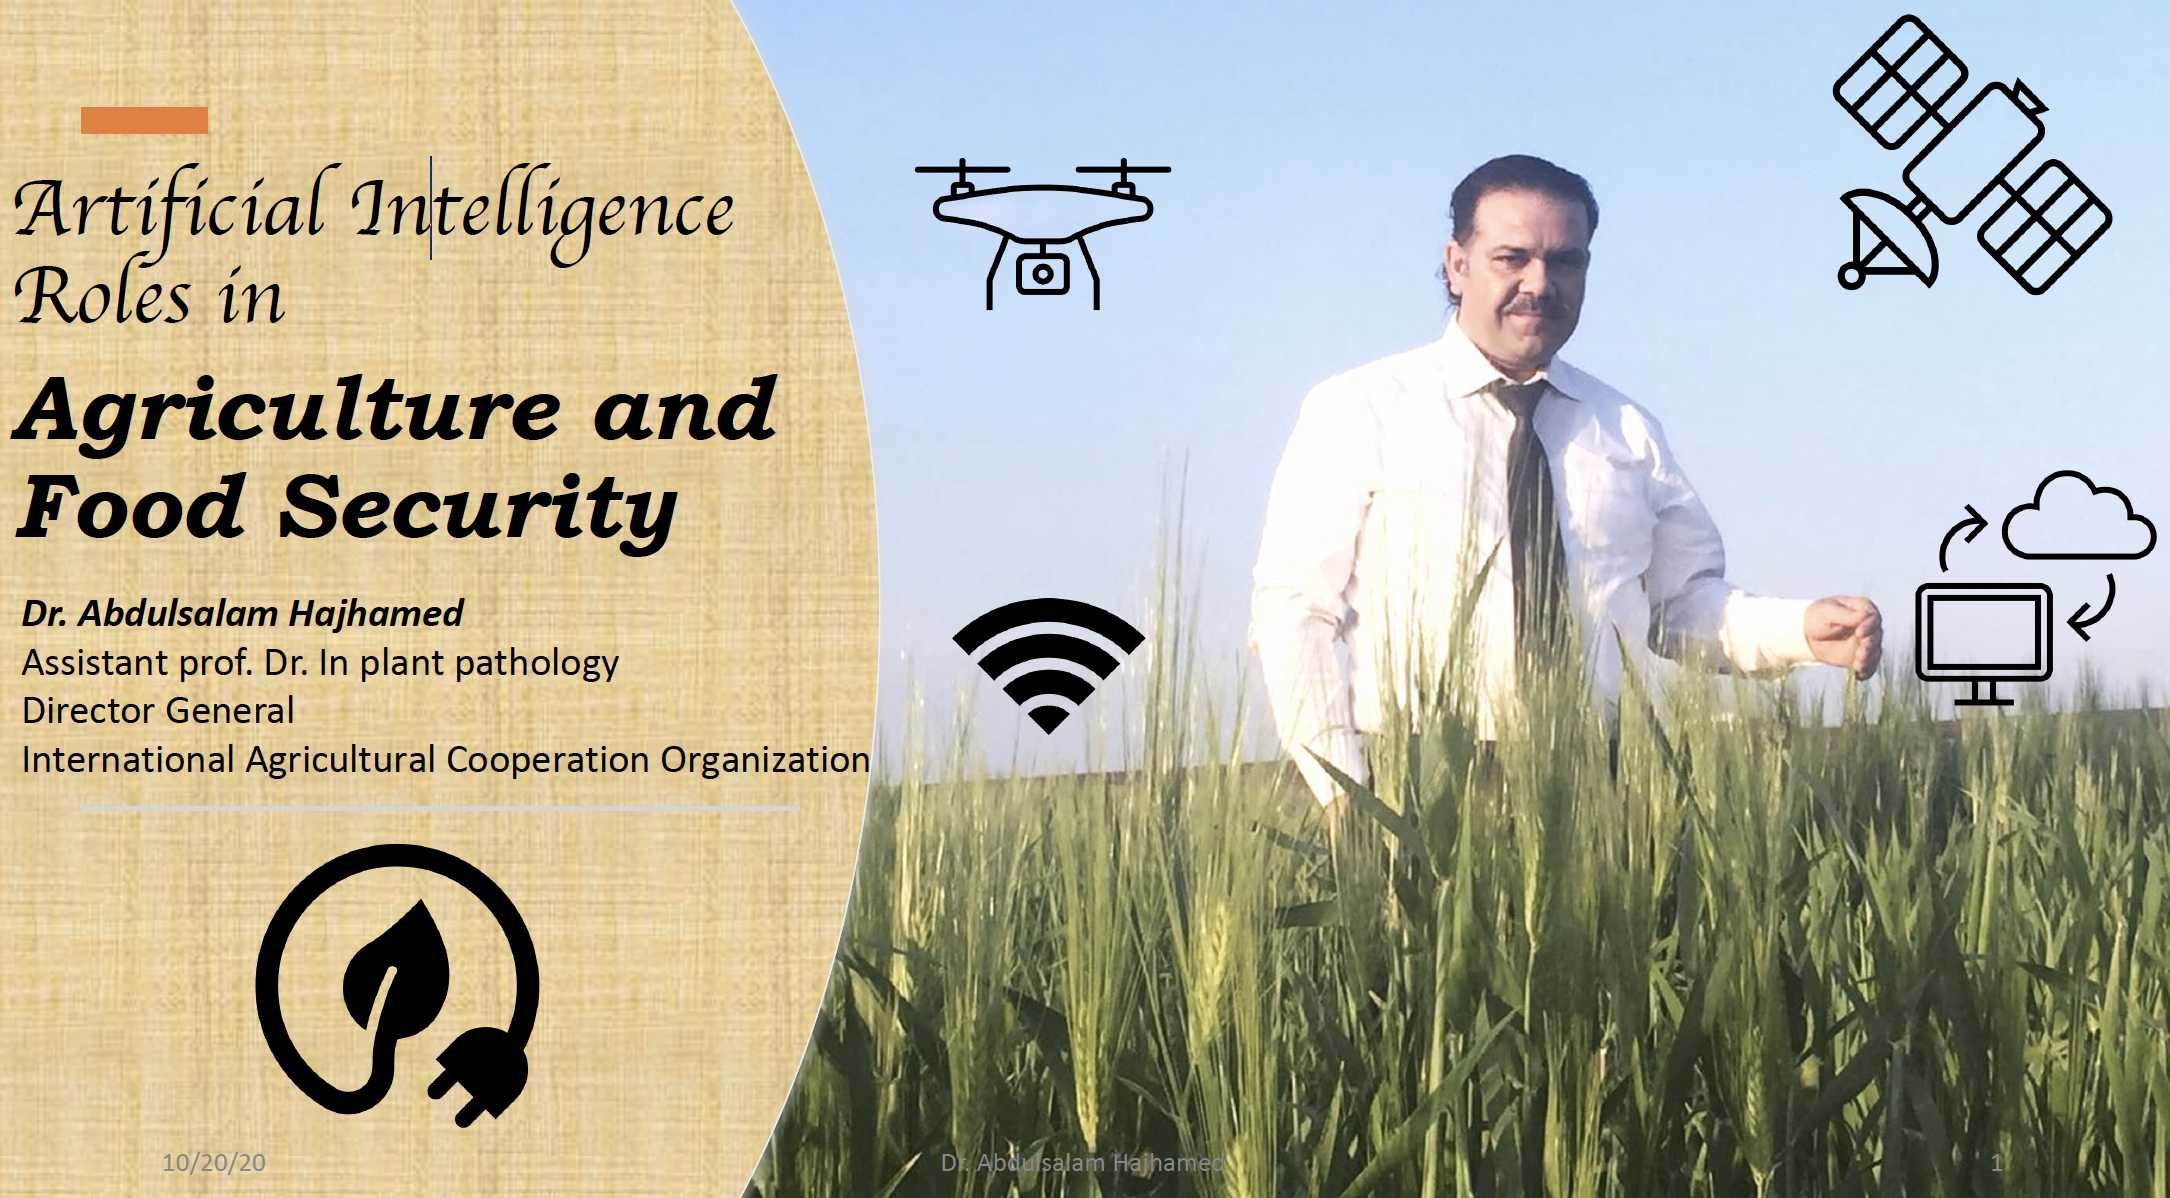 Artificial Intelligence Roles in Agriculture and Food Security